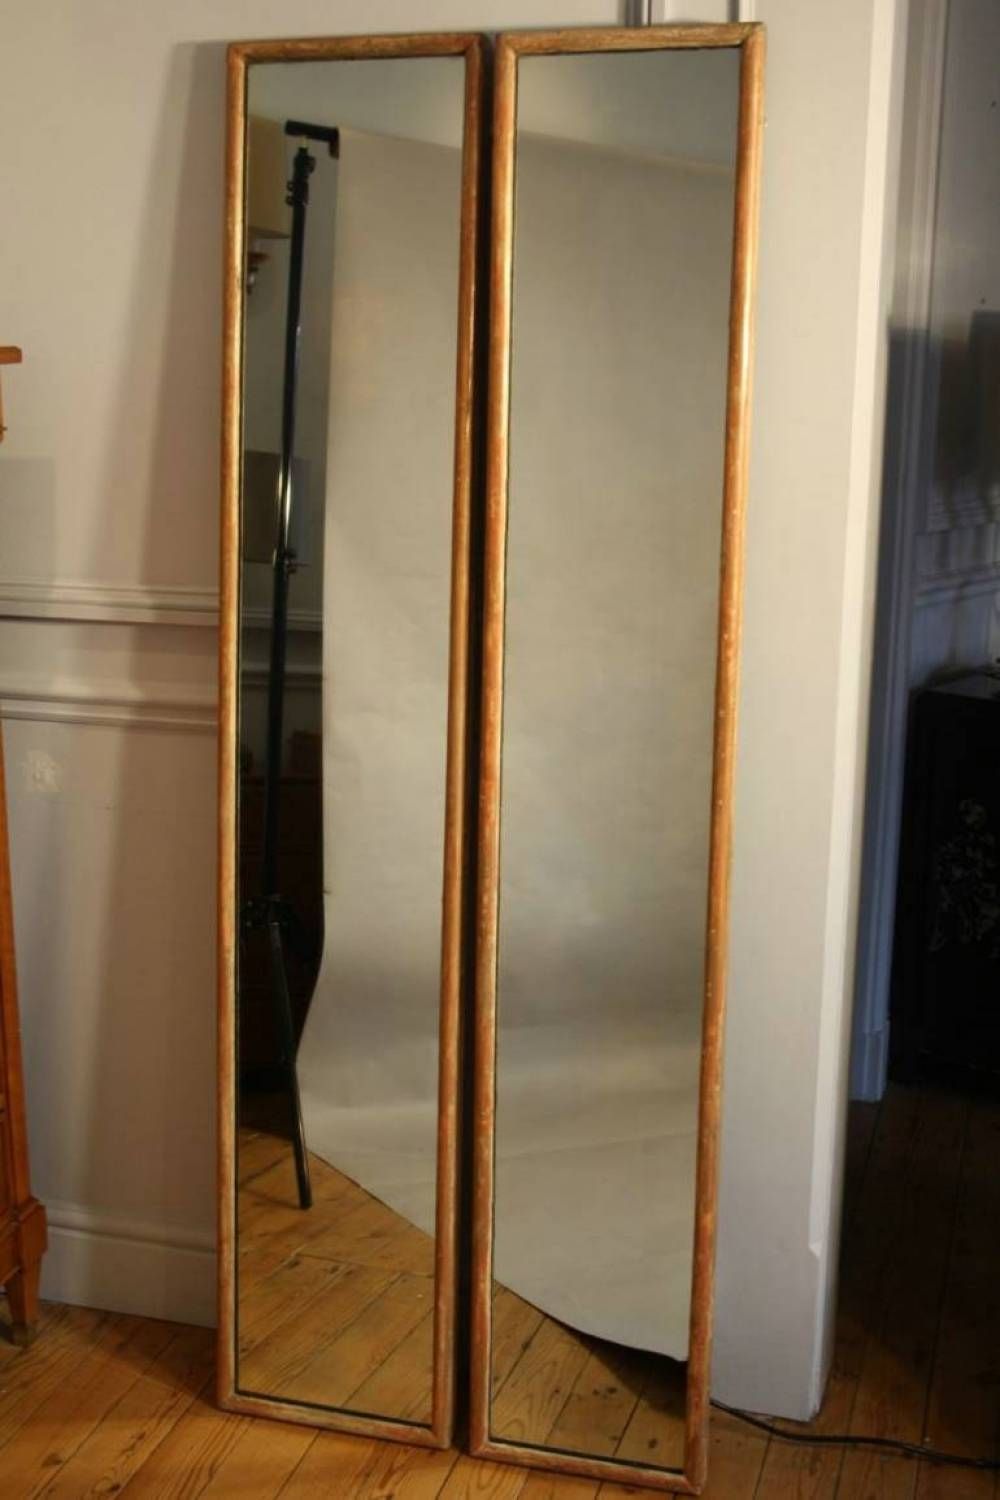 Pair Of Tall Narrow Mirrors In Mirrors Throughout Tall Narrow Mirrors (View 15 of 15)